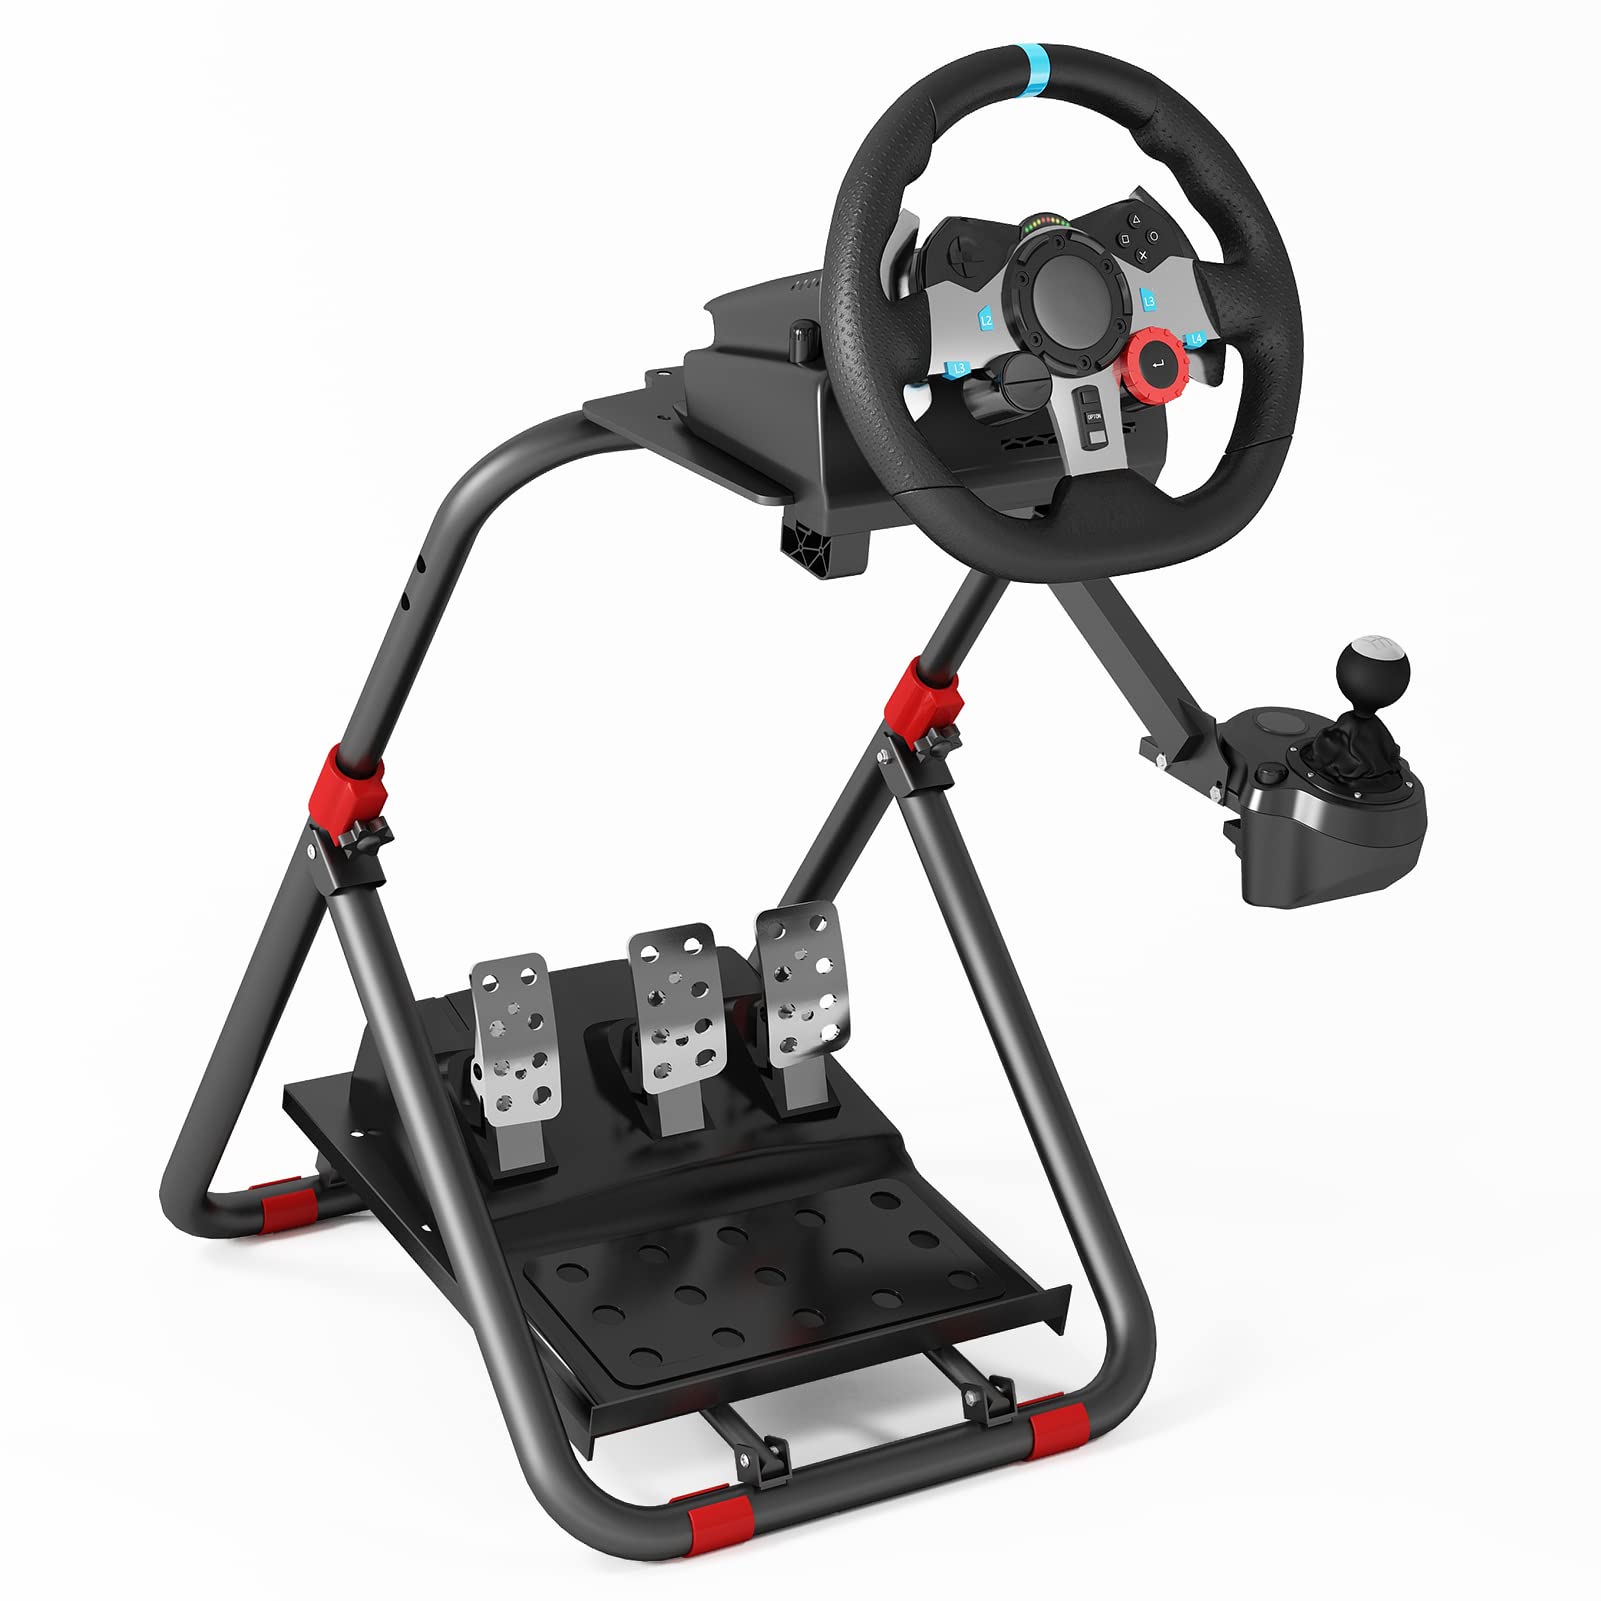 Racing Steering Wheel Stand Collapsible Tilt-Adjustable Racing Stand for  Logitech G25 G27 G29 G920 / Thrustmaster T248X T248 T300 T150 458 TX Xbox 1  PS4 PS5 PC 